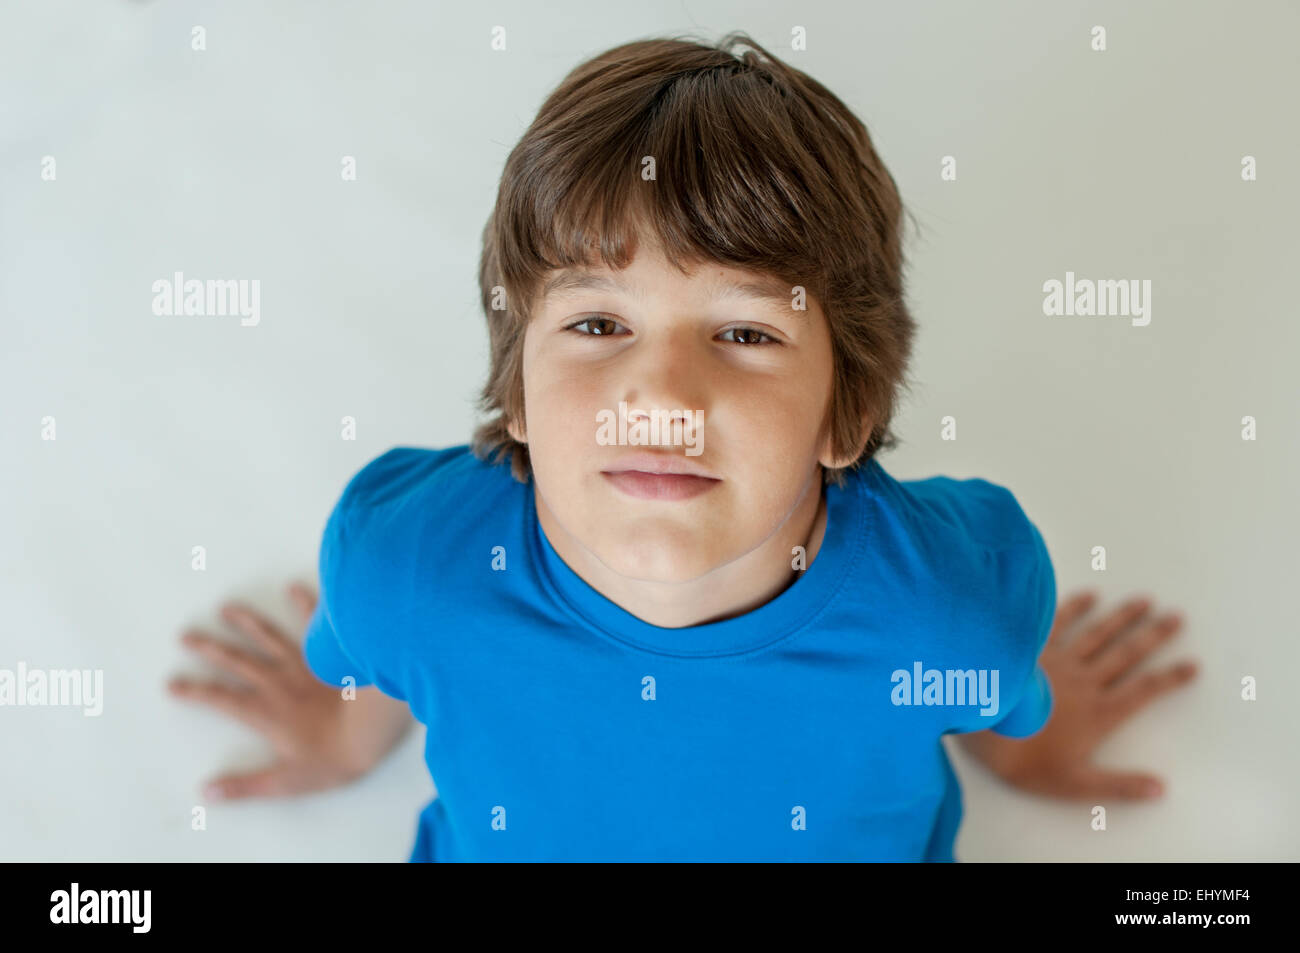 Portrait of a boy looking up at the camera Stock Photo